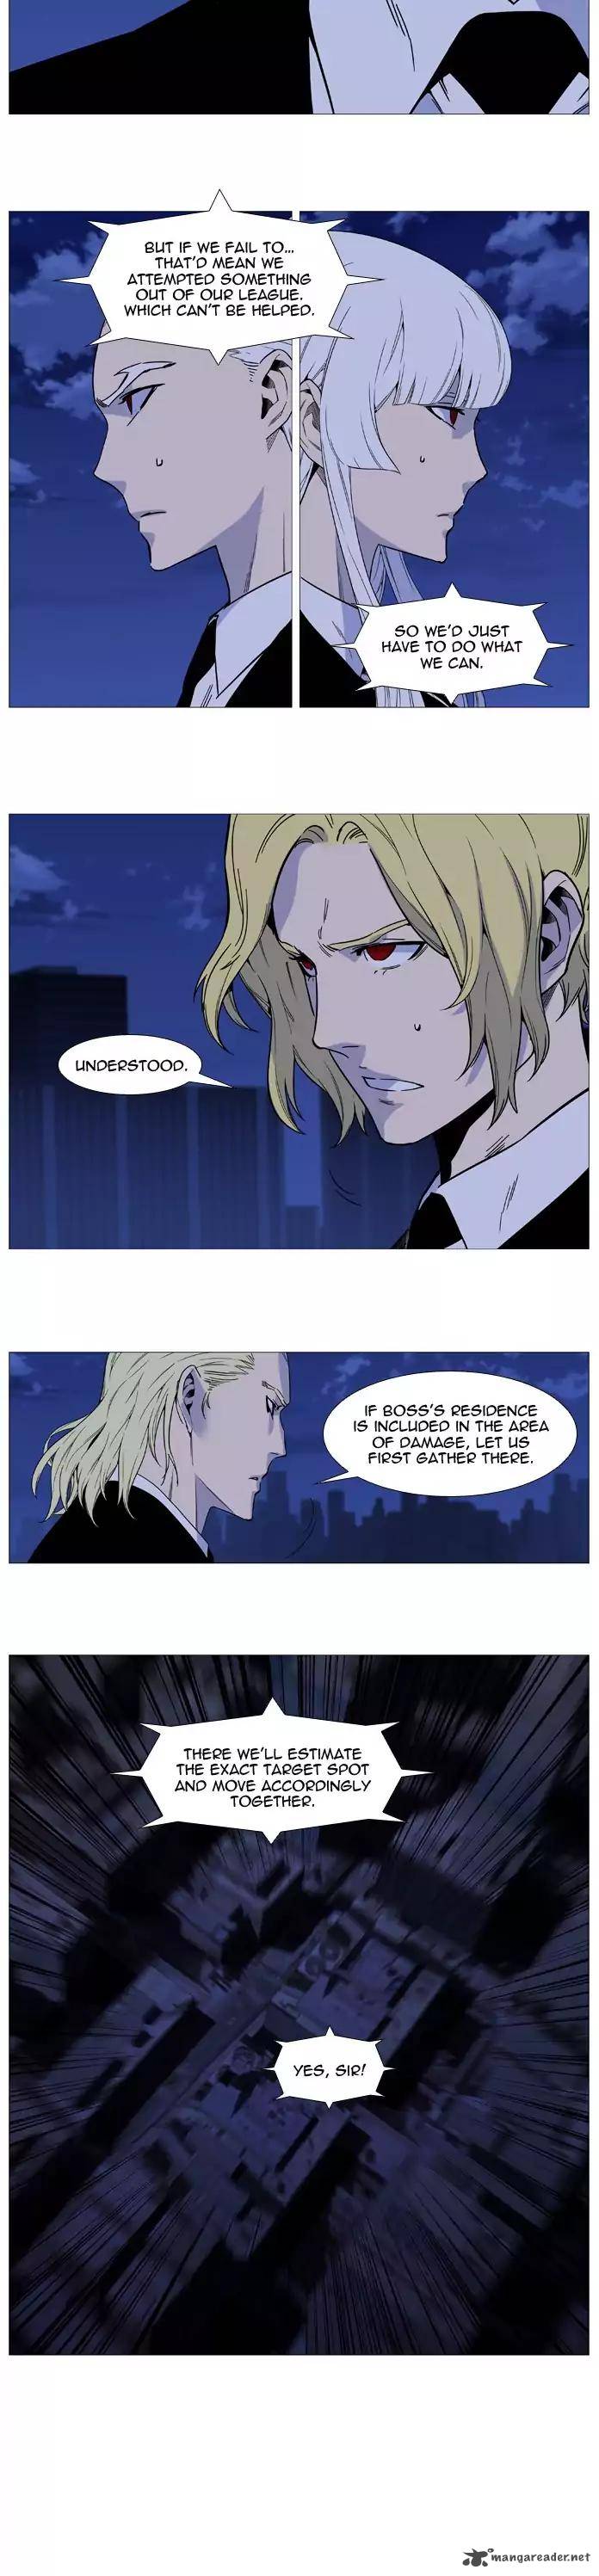 Noblesse 526